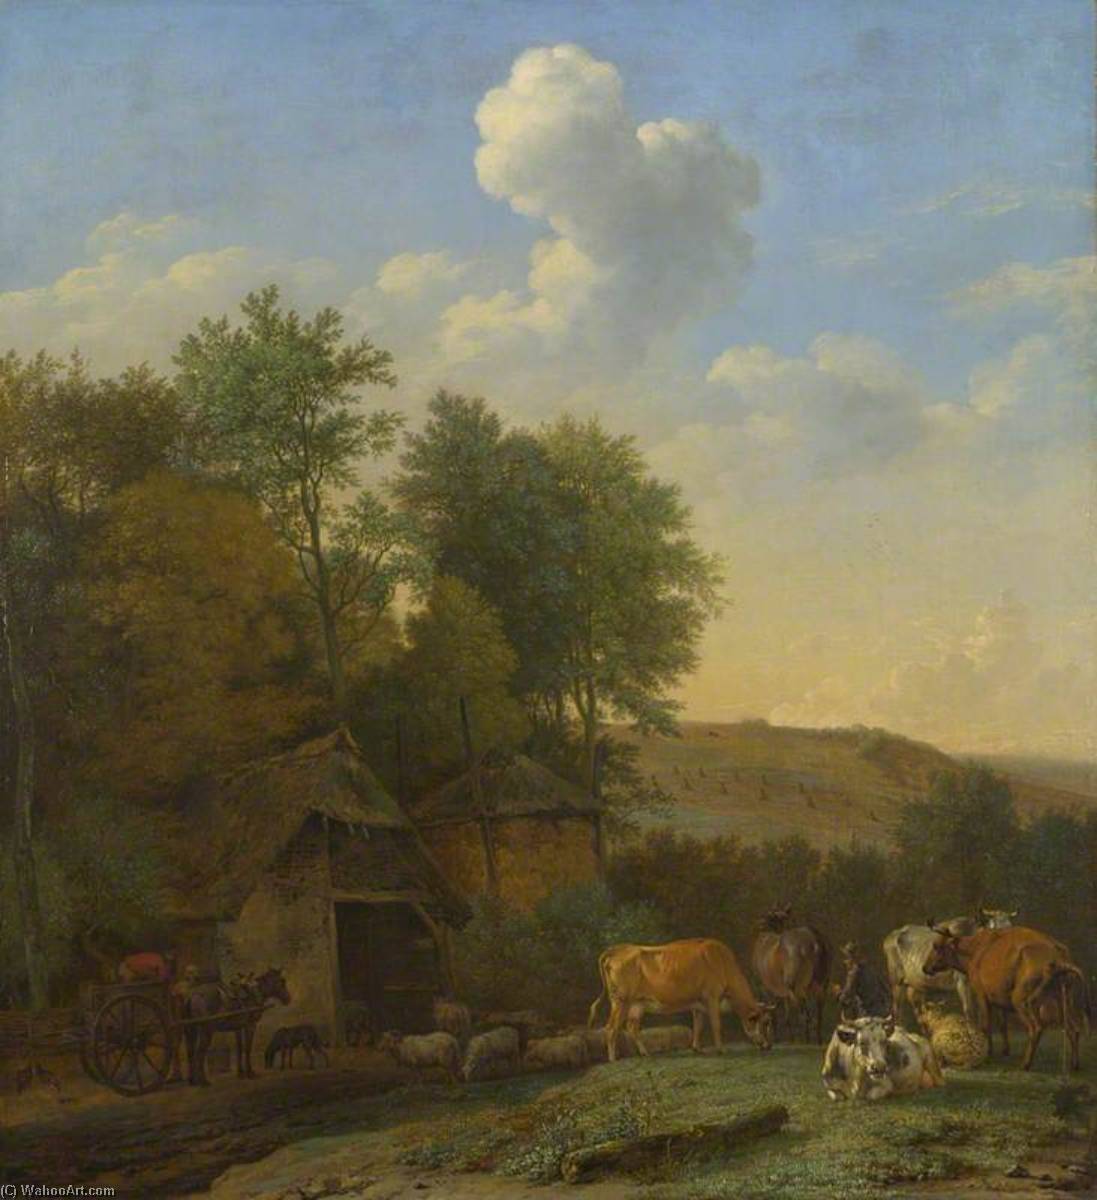 WikiOO.org - Enciclopedia of Fine Arts - Pictura, lucrări de artă Paulus Potter - A Landscape with Cows, Sheep and Horses by a Barn